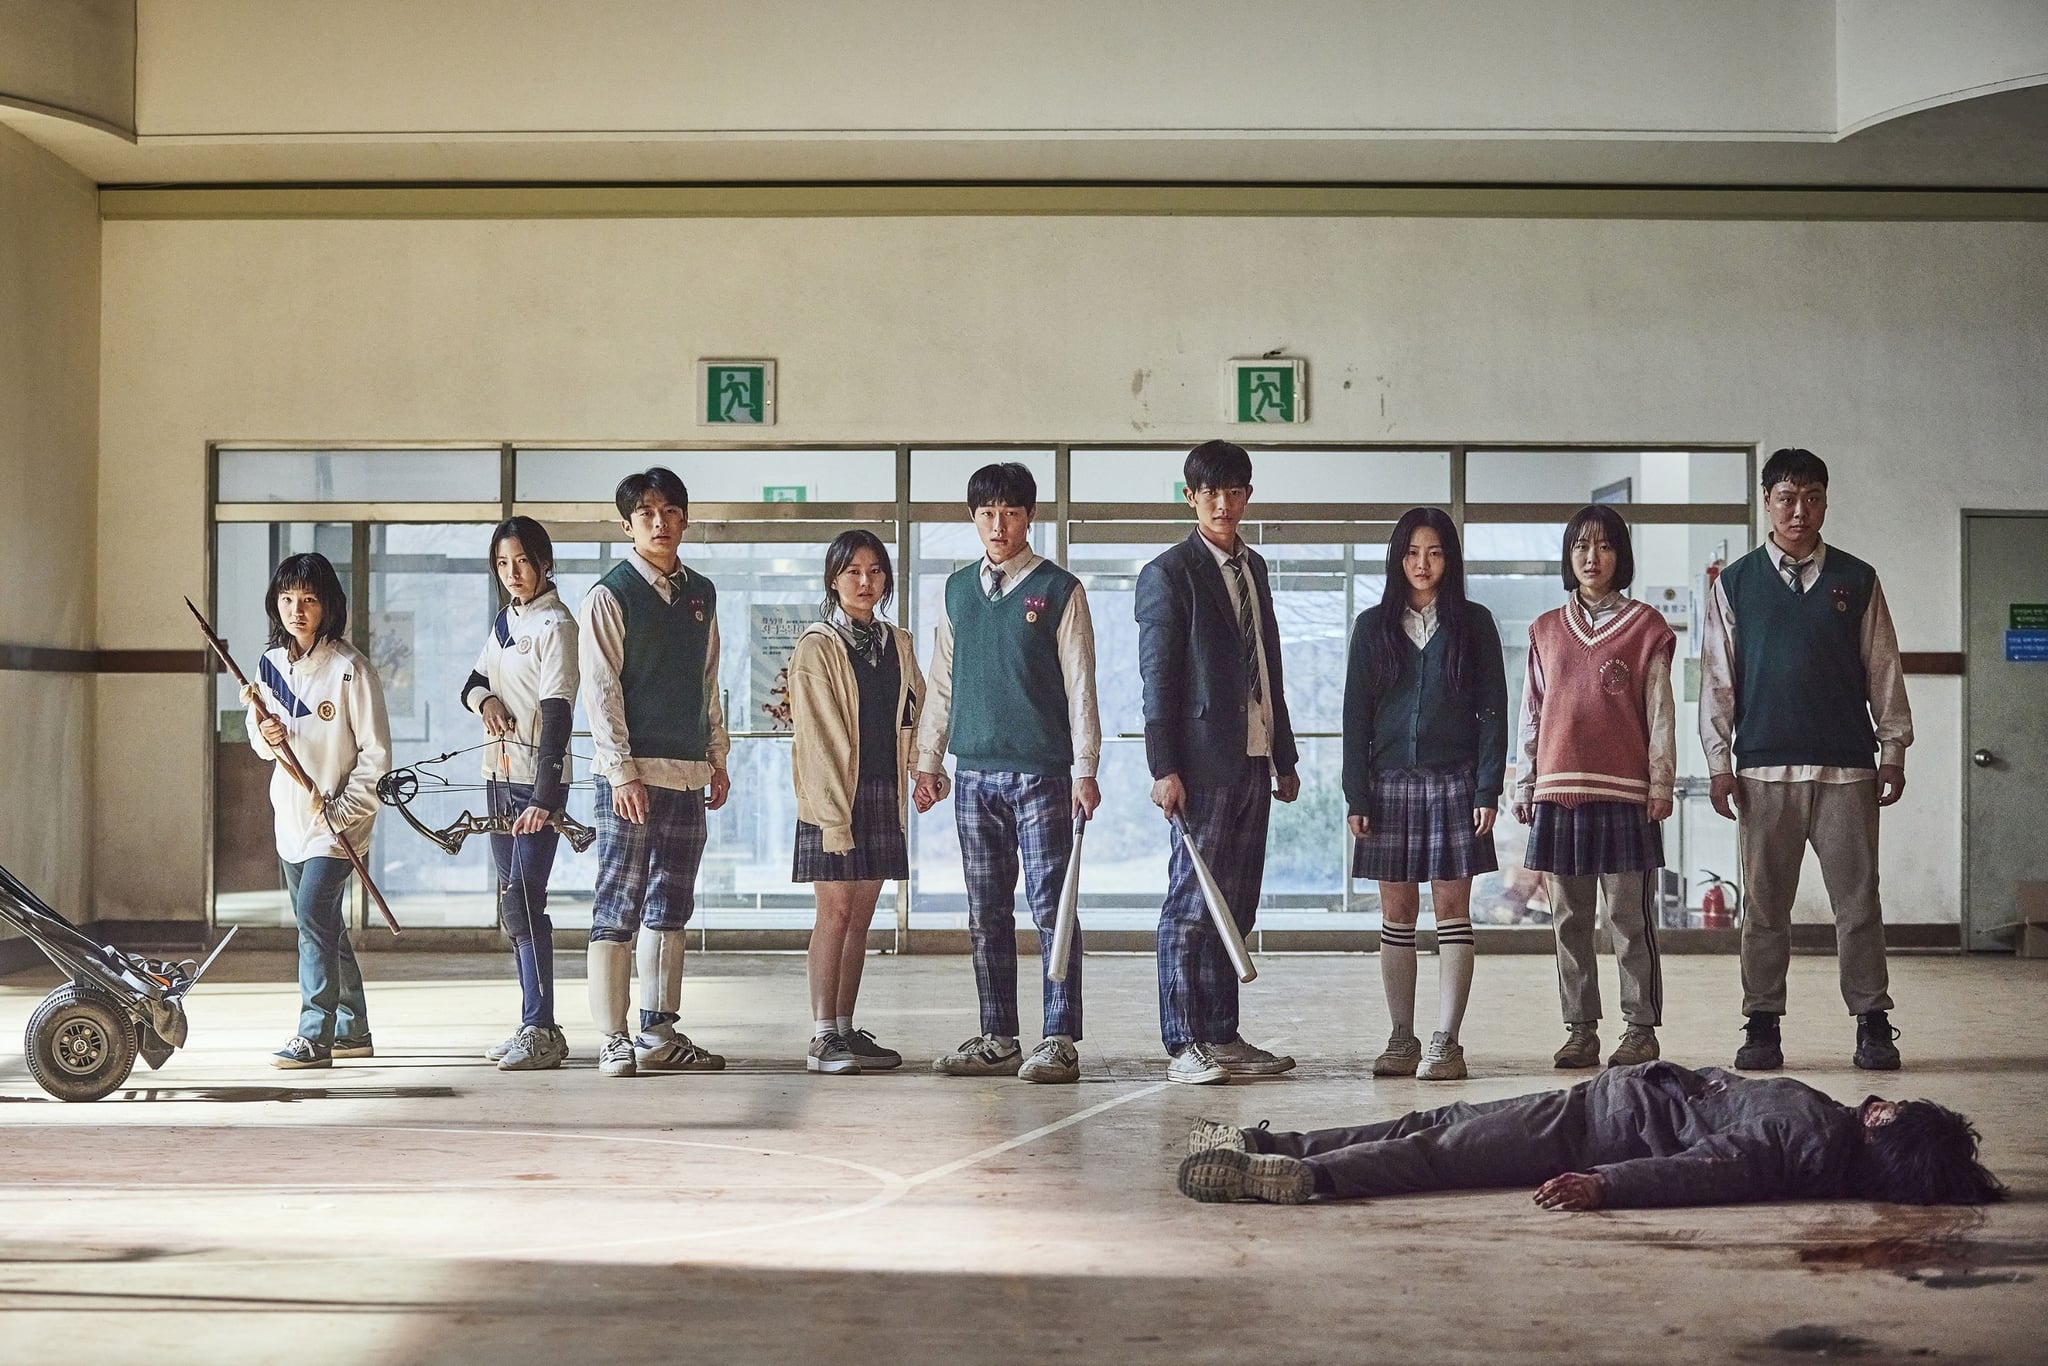 ALL OF US ARE DEAD, (aka JIGEUM URI HAKGYONEUN), PARK-Ji-hu (4th from left), YOON Chan-Young (centre), Solomon PARK (6th from left), CHO Yi-Hyun (7th from left), (Season 1, aired Jan. 28, 2022. photo: YANG Hae-sung / Netflix / Courtesy Everett Collection